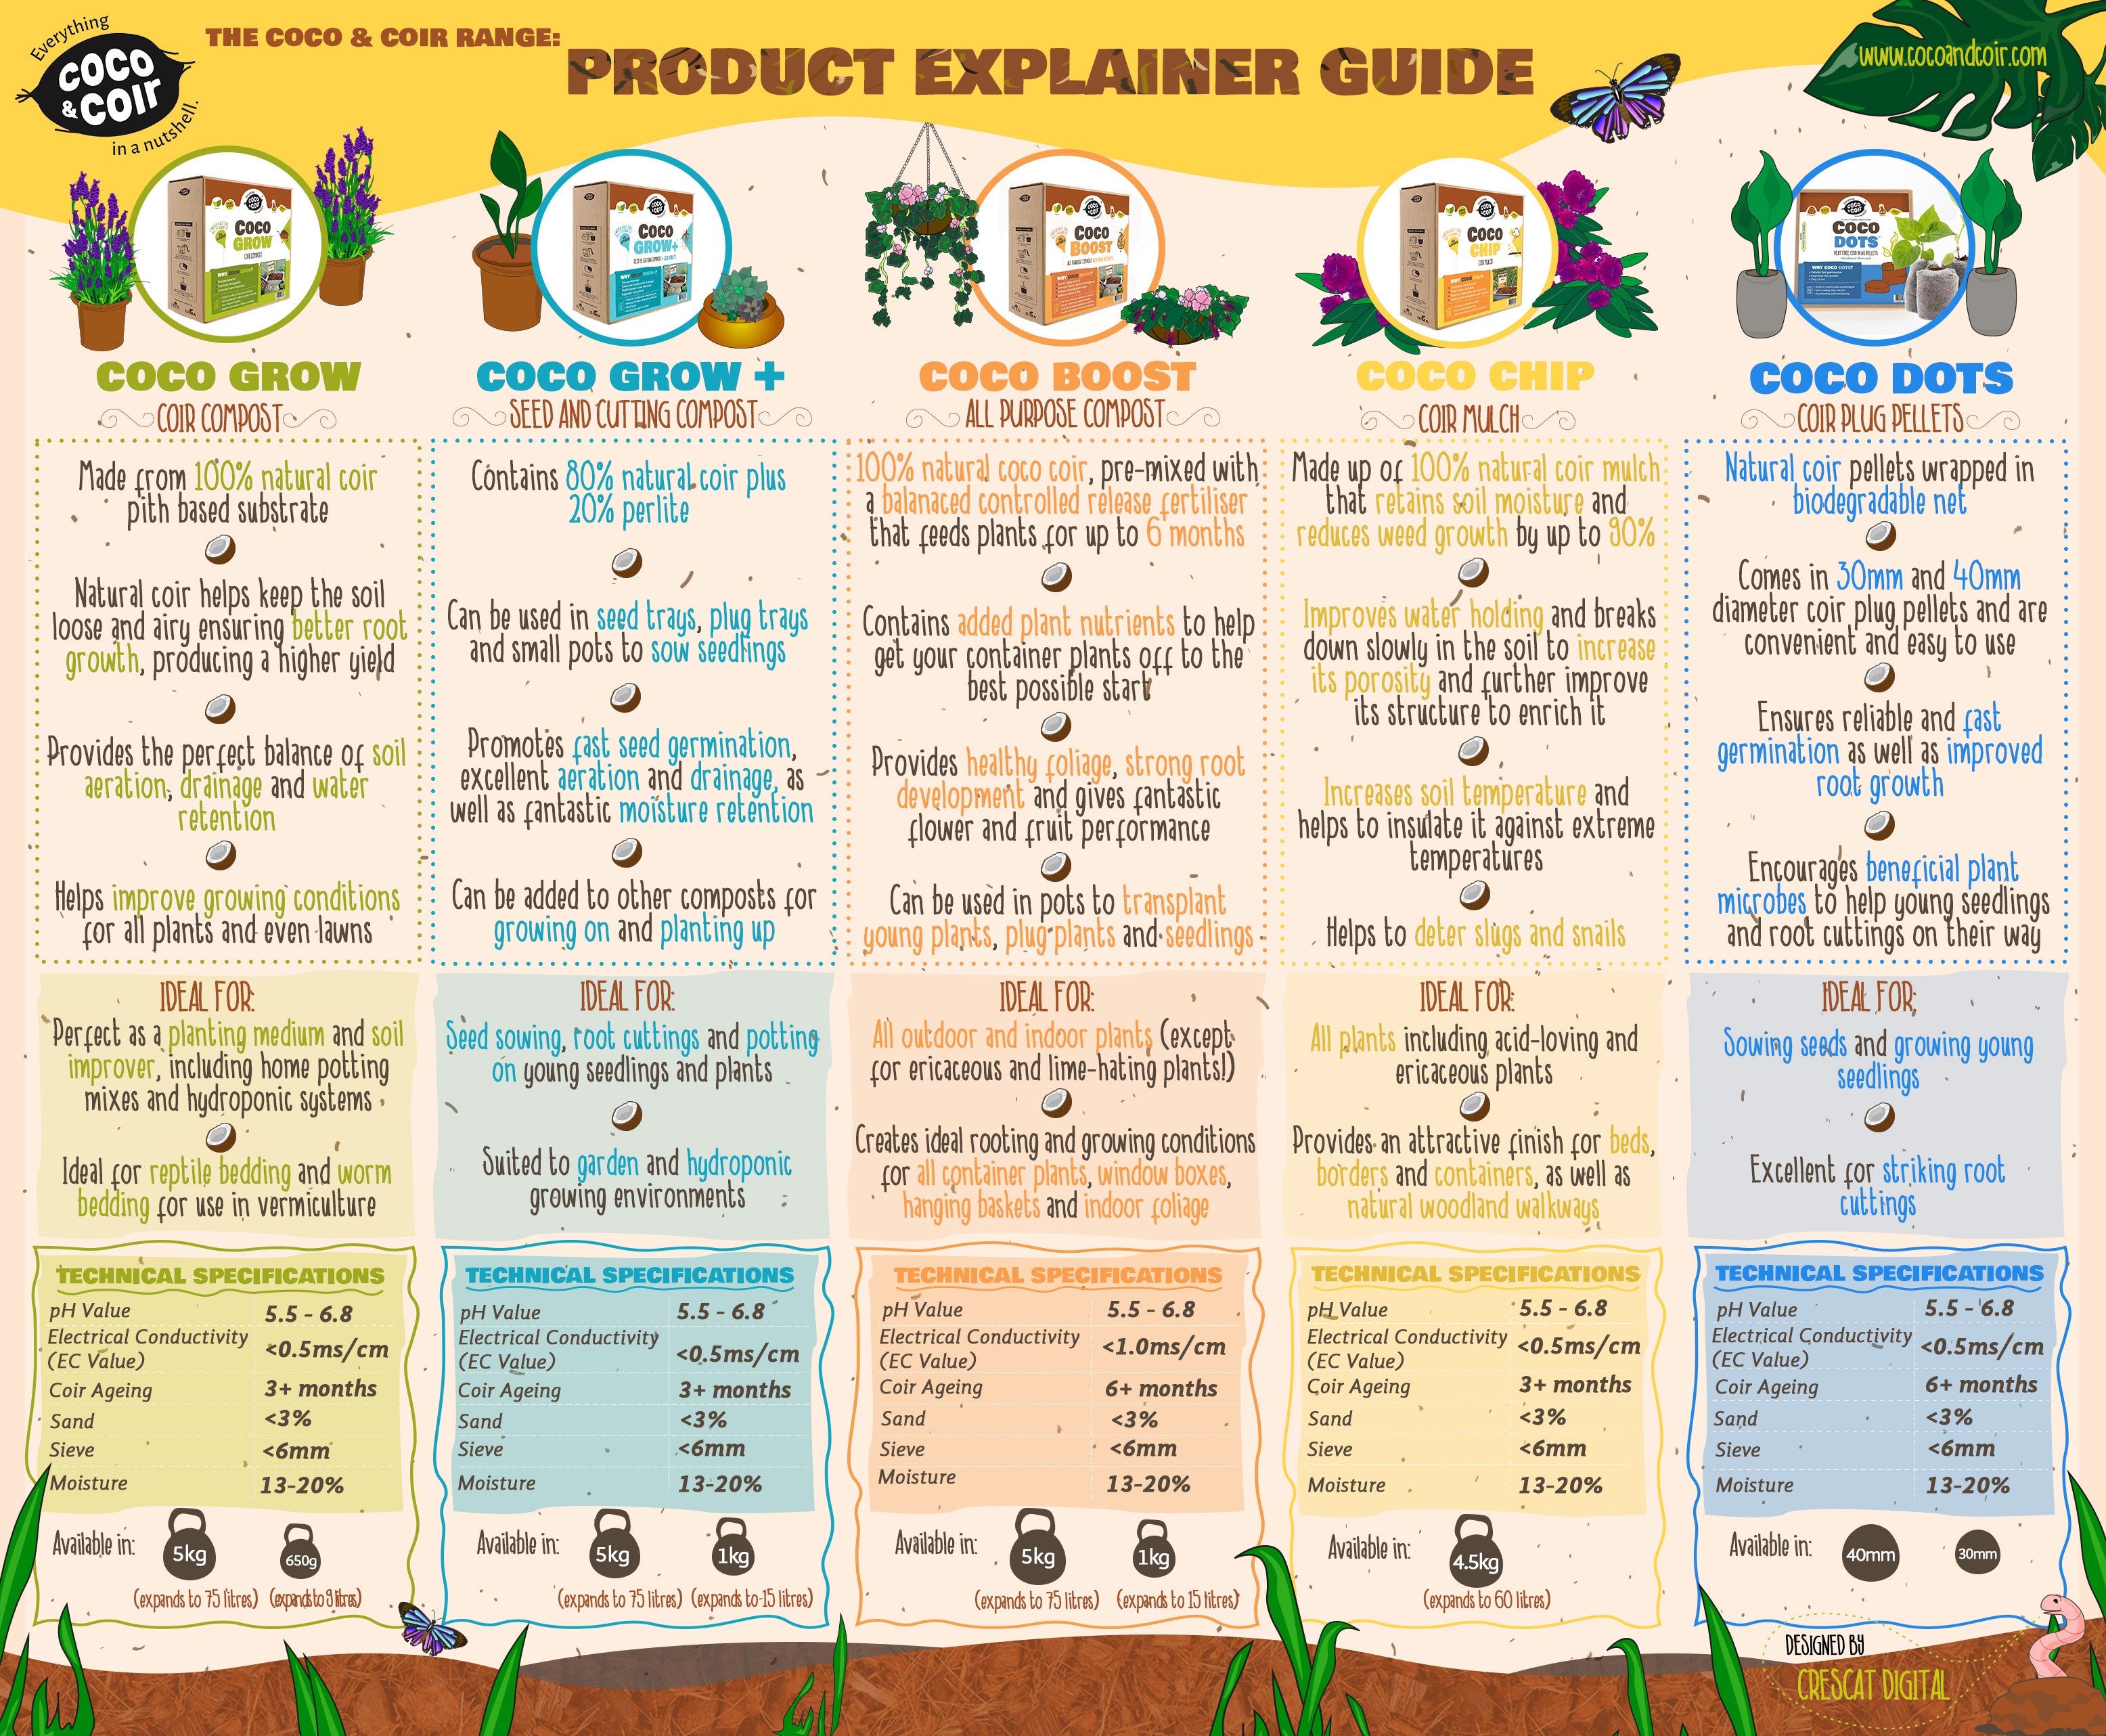 Product Explainer Guide Coco & Coir Infographic 